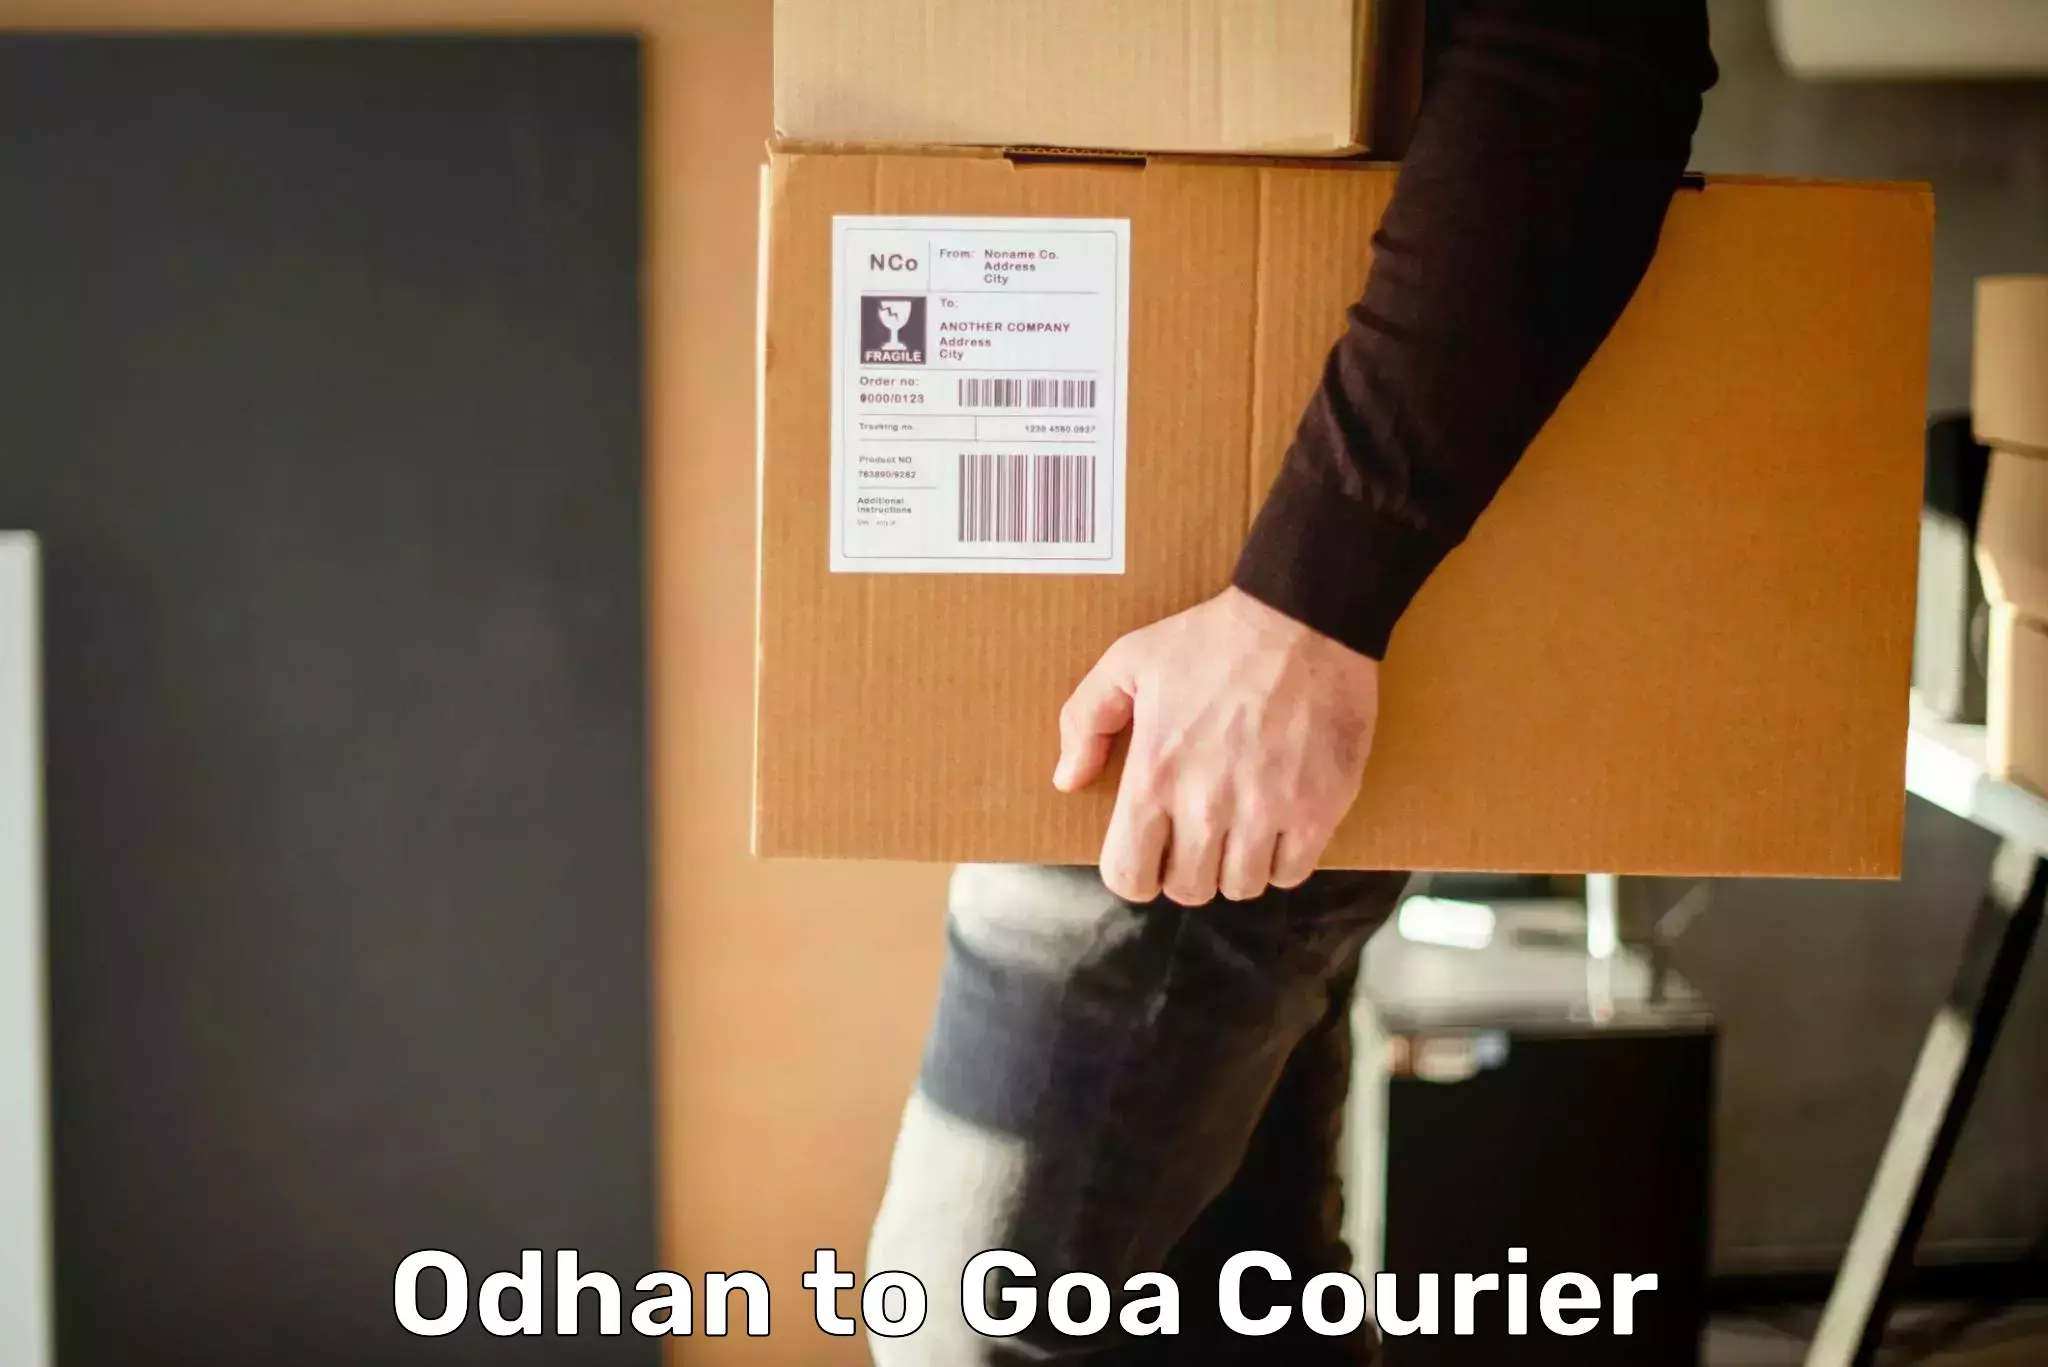 Tracking updates in Odhan to Goa